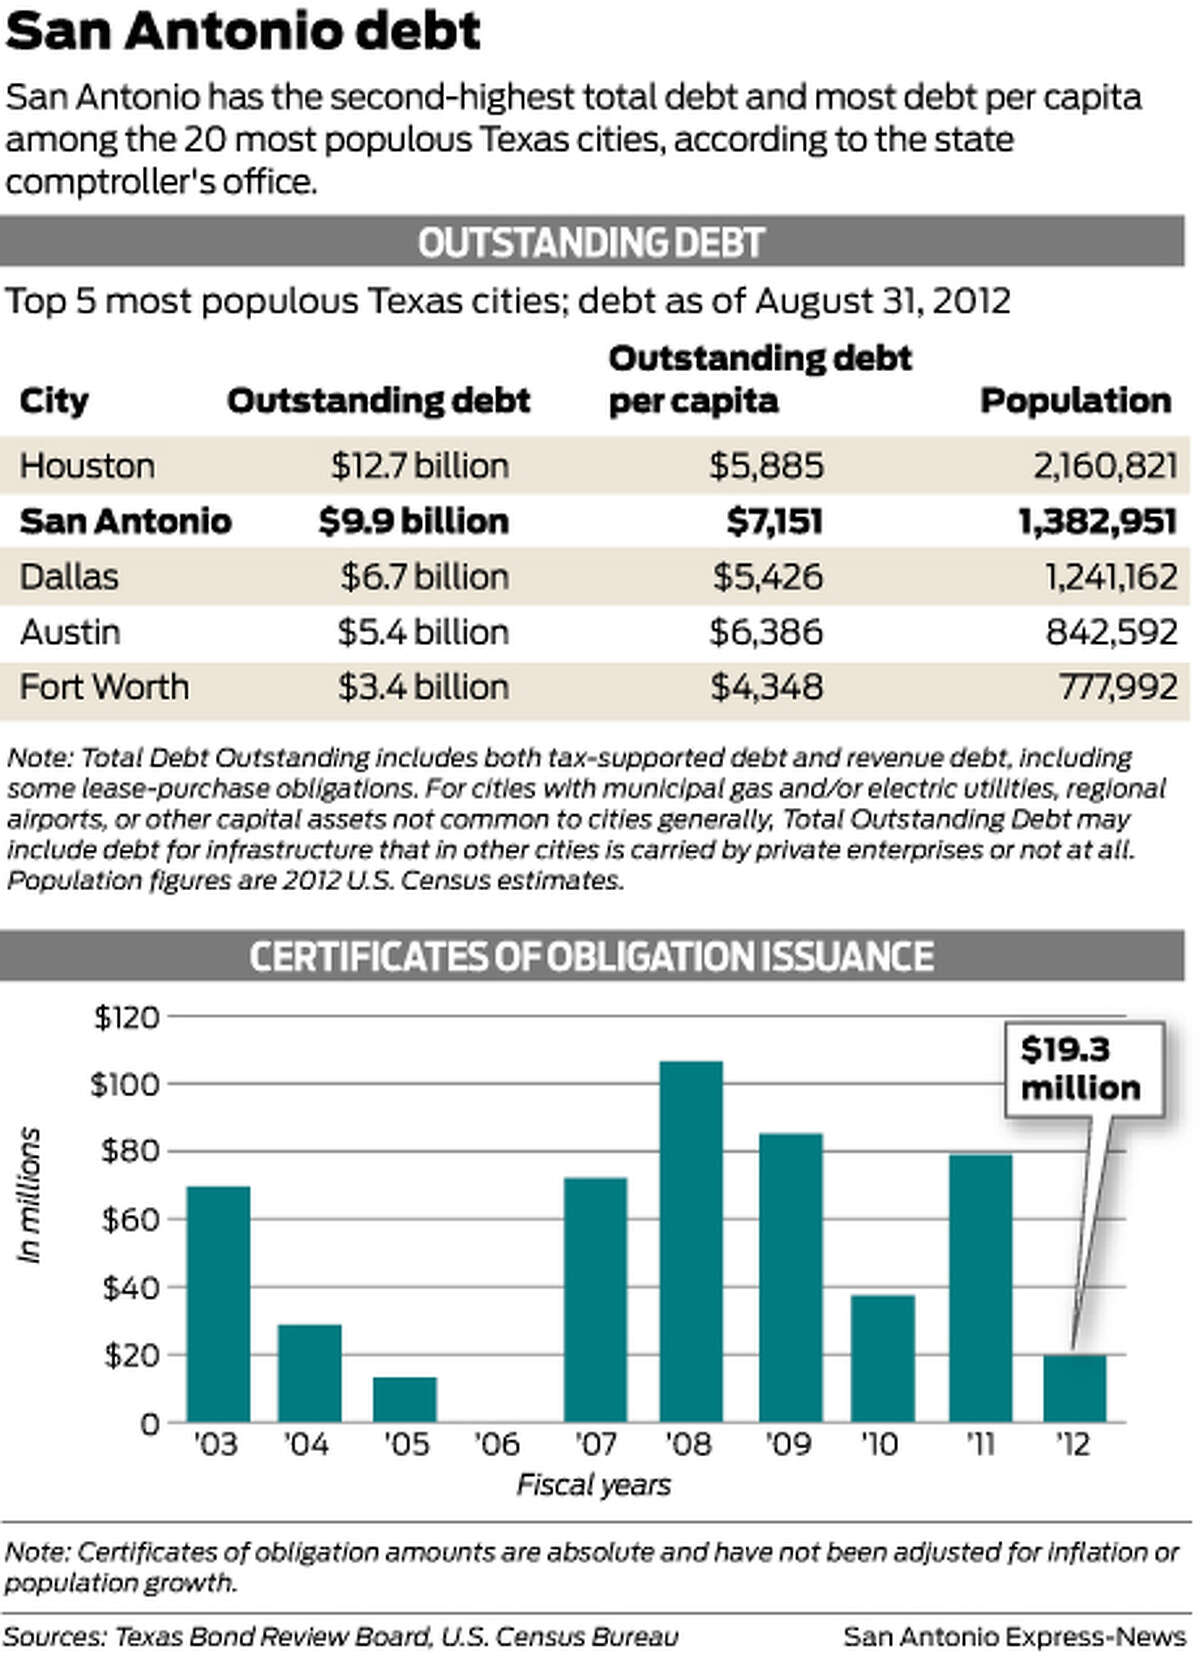 San Antonio debt San Antonio has the second-highest total debt and most debt per capita among the 20 most populous Texas cities, according to the state comptroller's office. 